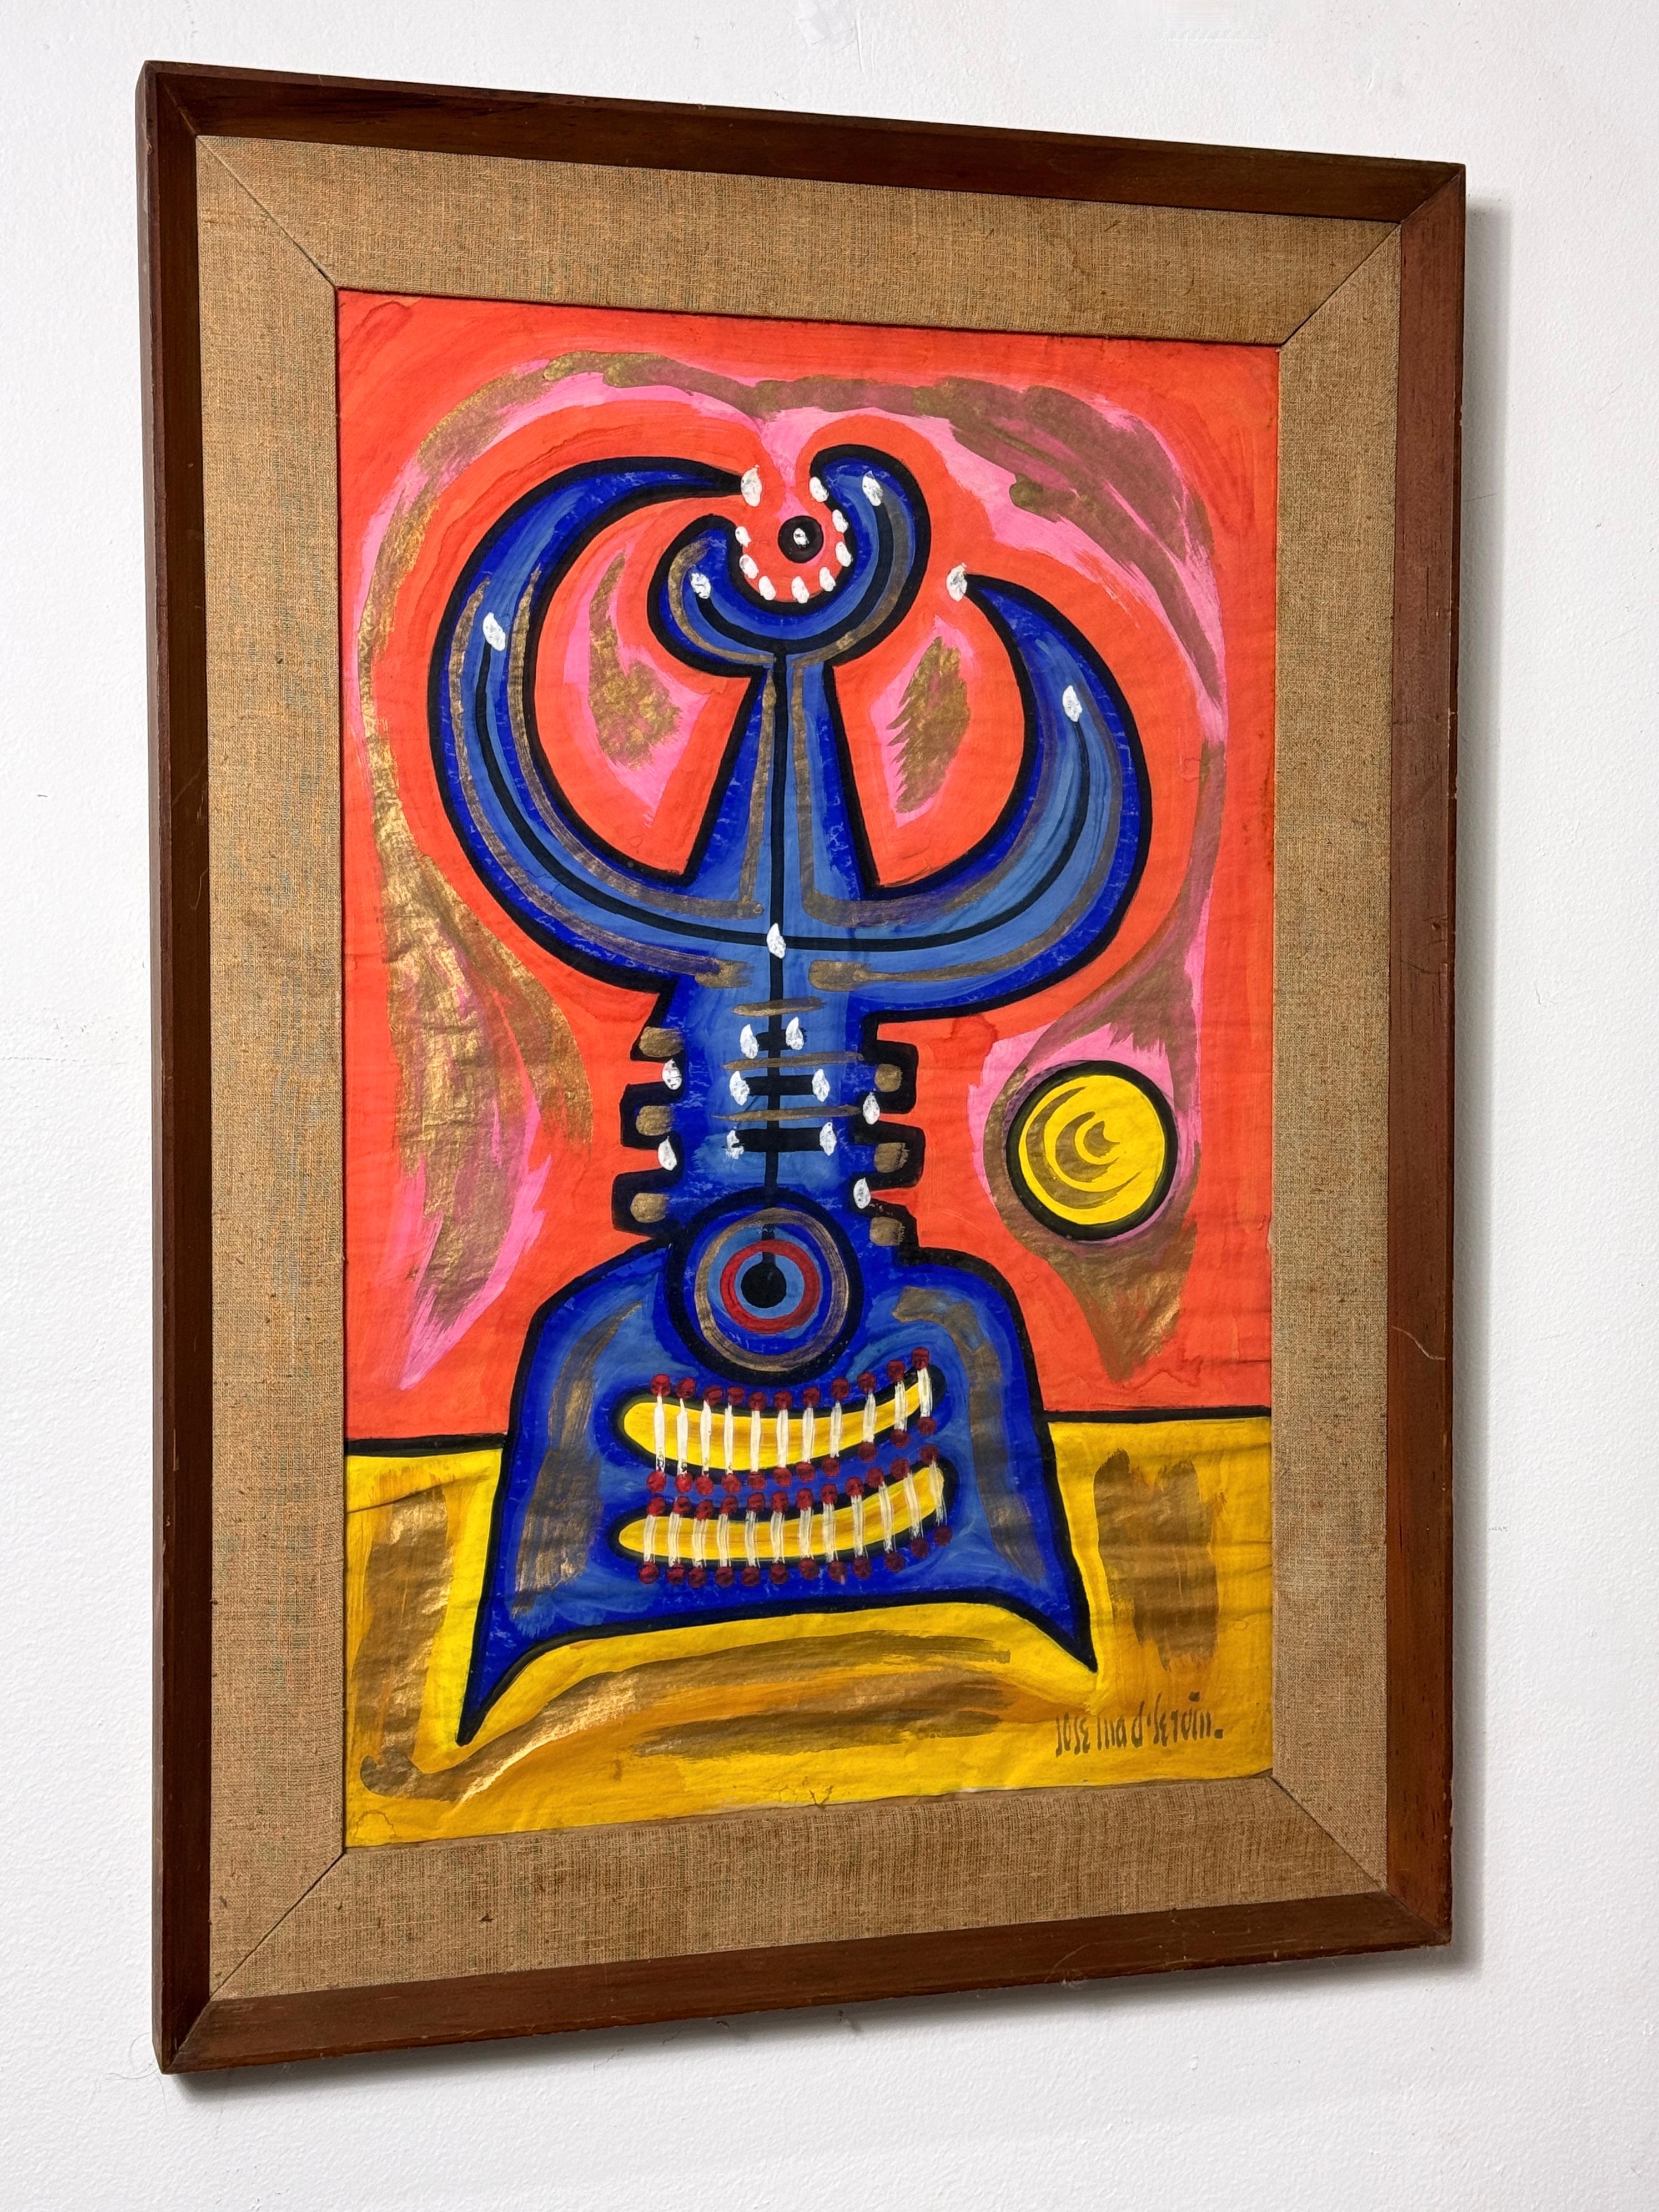 Colorful gouache painting by Mexican artist Jose Maria de Servin
circa 1950s

A modernist folk art piece in bold and vibrant colors with metallic gold accents in original burlap framing.
Signed lower right

framed dimensions
25.75 x 35.75